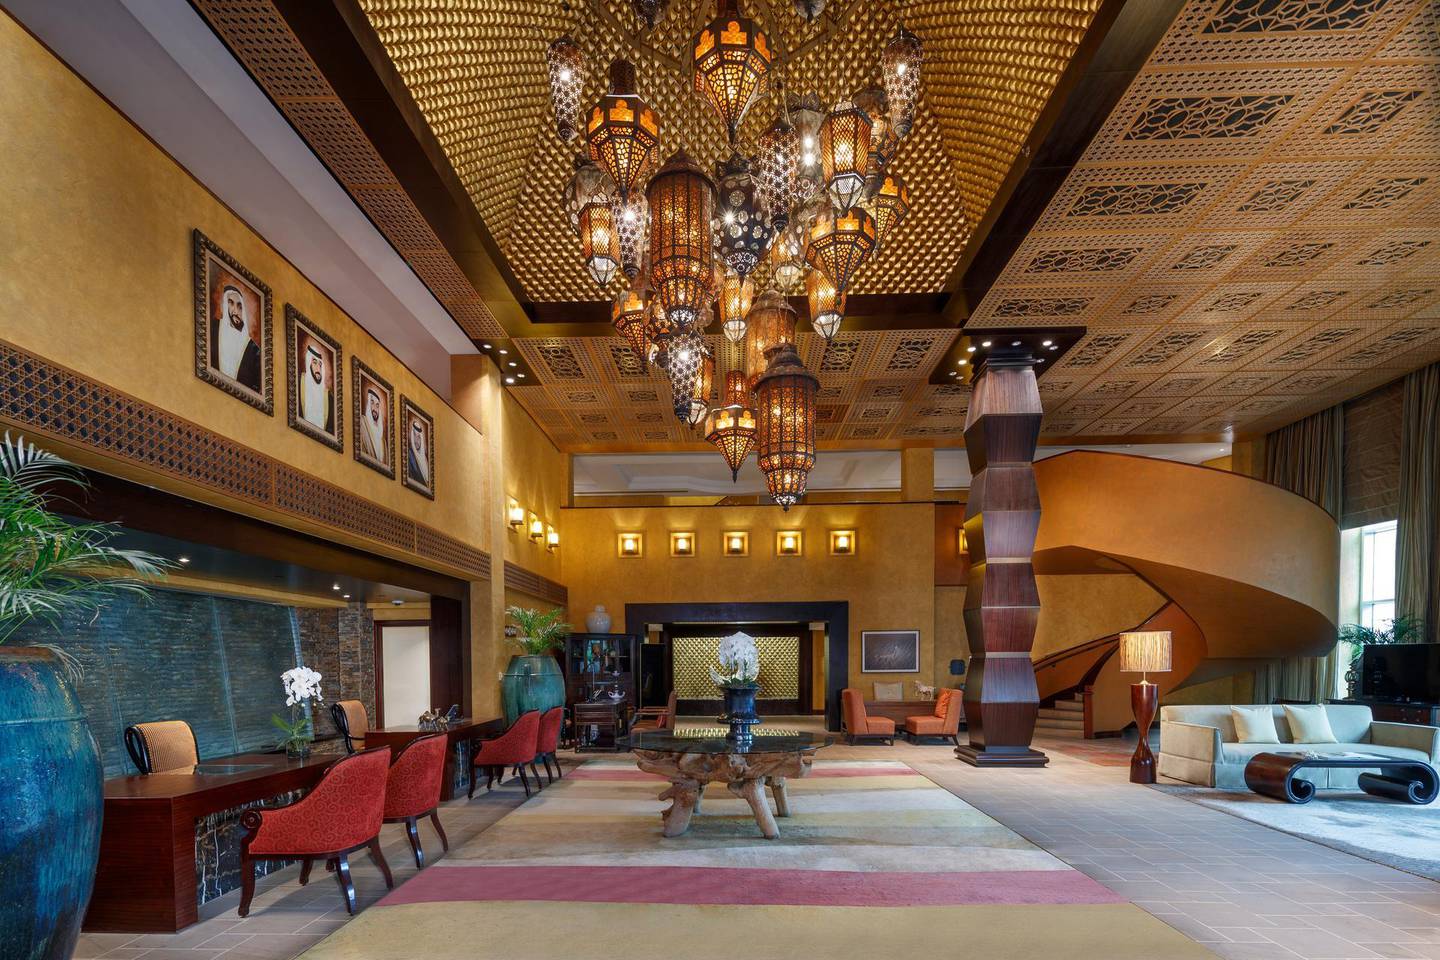 The reception area of the Desert Islands Resort and Spa. Courtesy Anantara